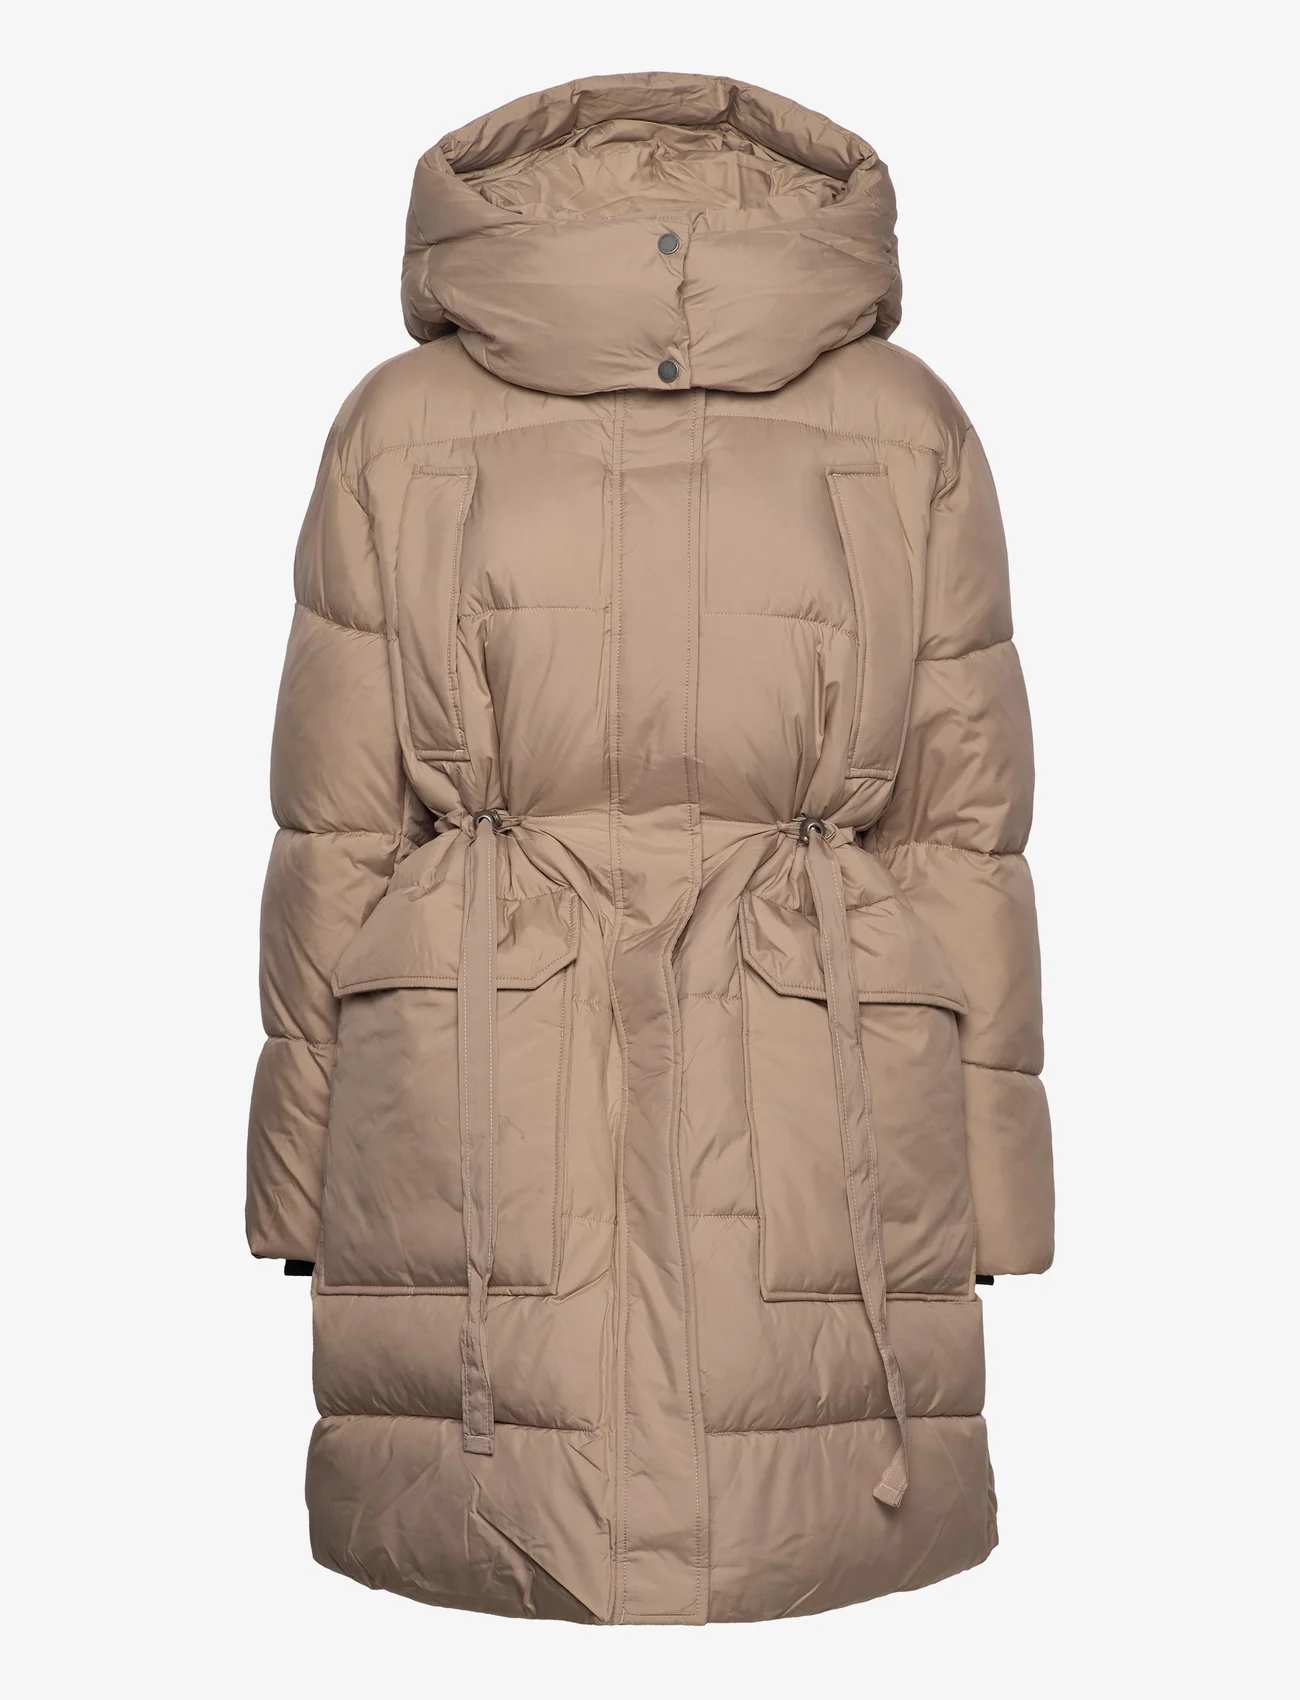 Didriksons - RIND WNS PARKA - padded coats - beige - 0